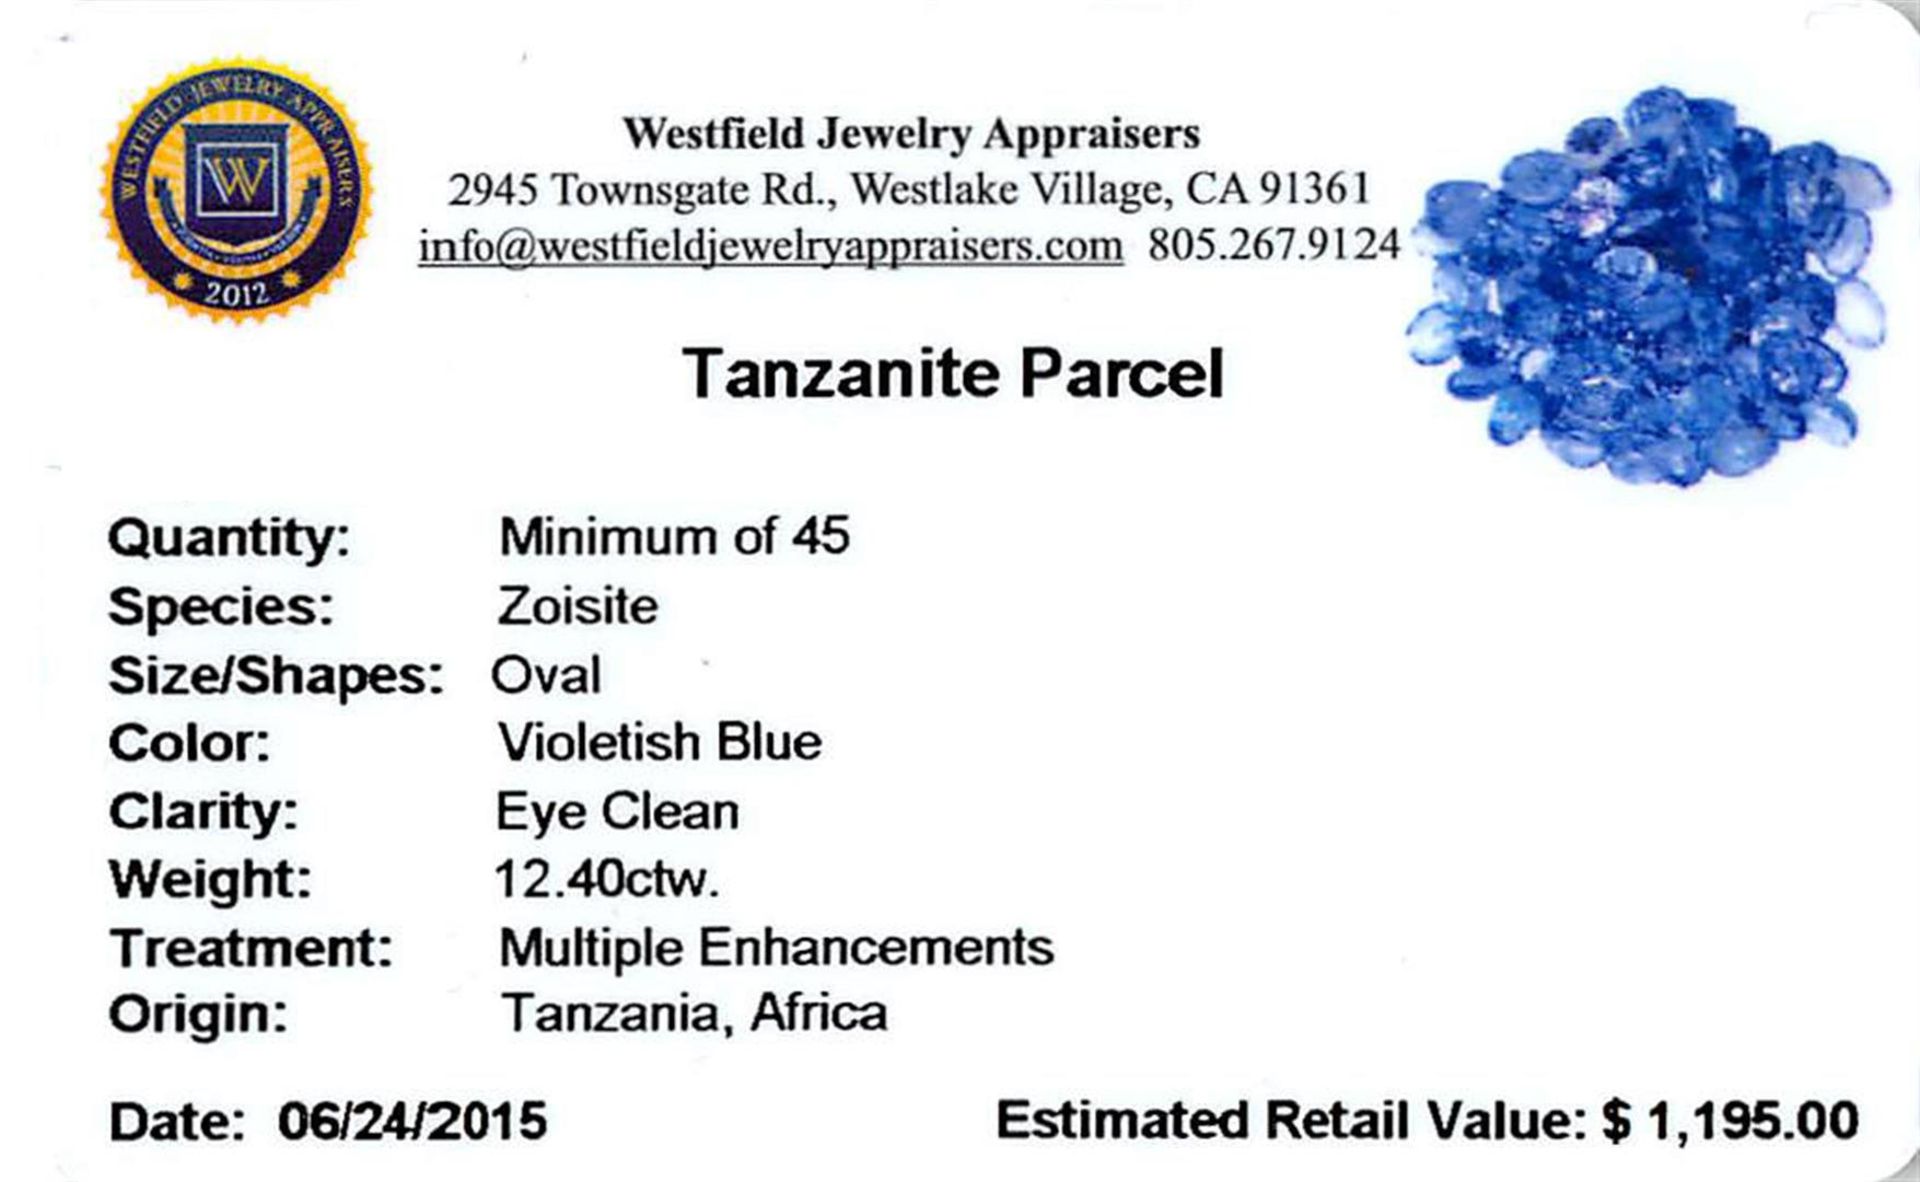 12.4 ctw Oval Mixed Tanzanite Parcel - Image 2 of 2